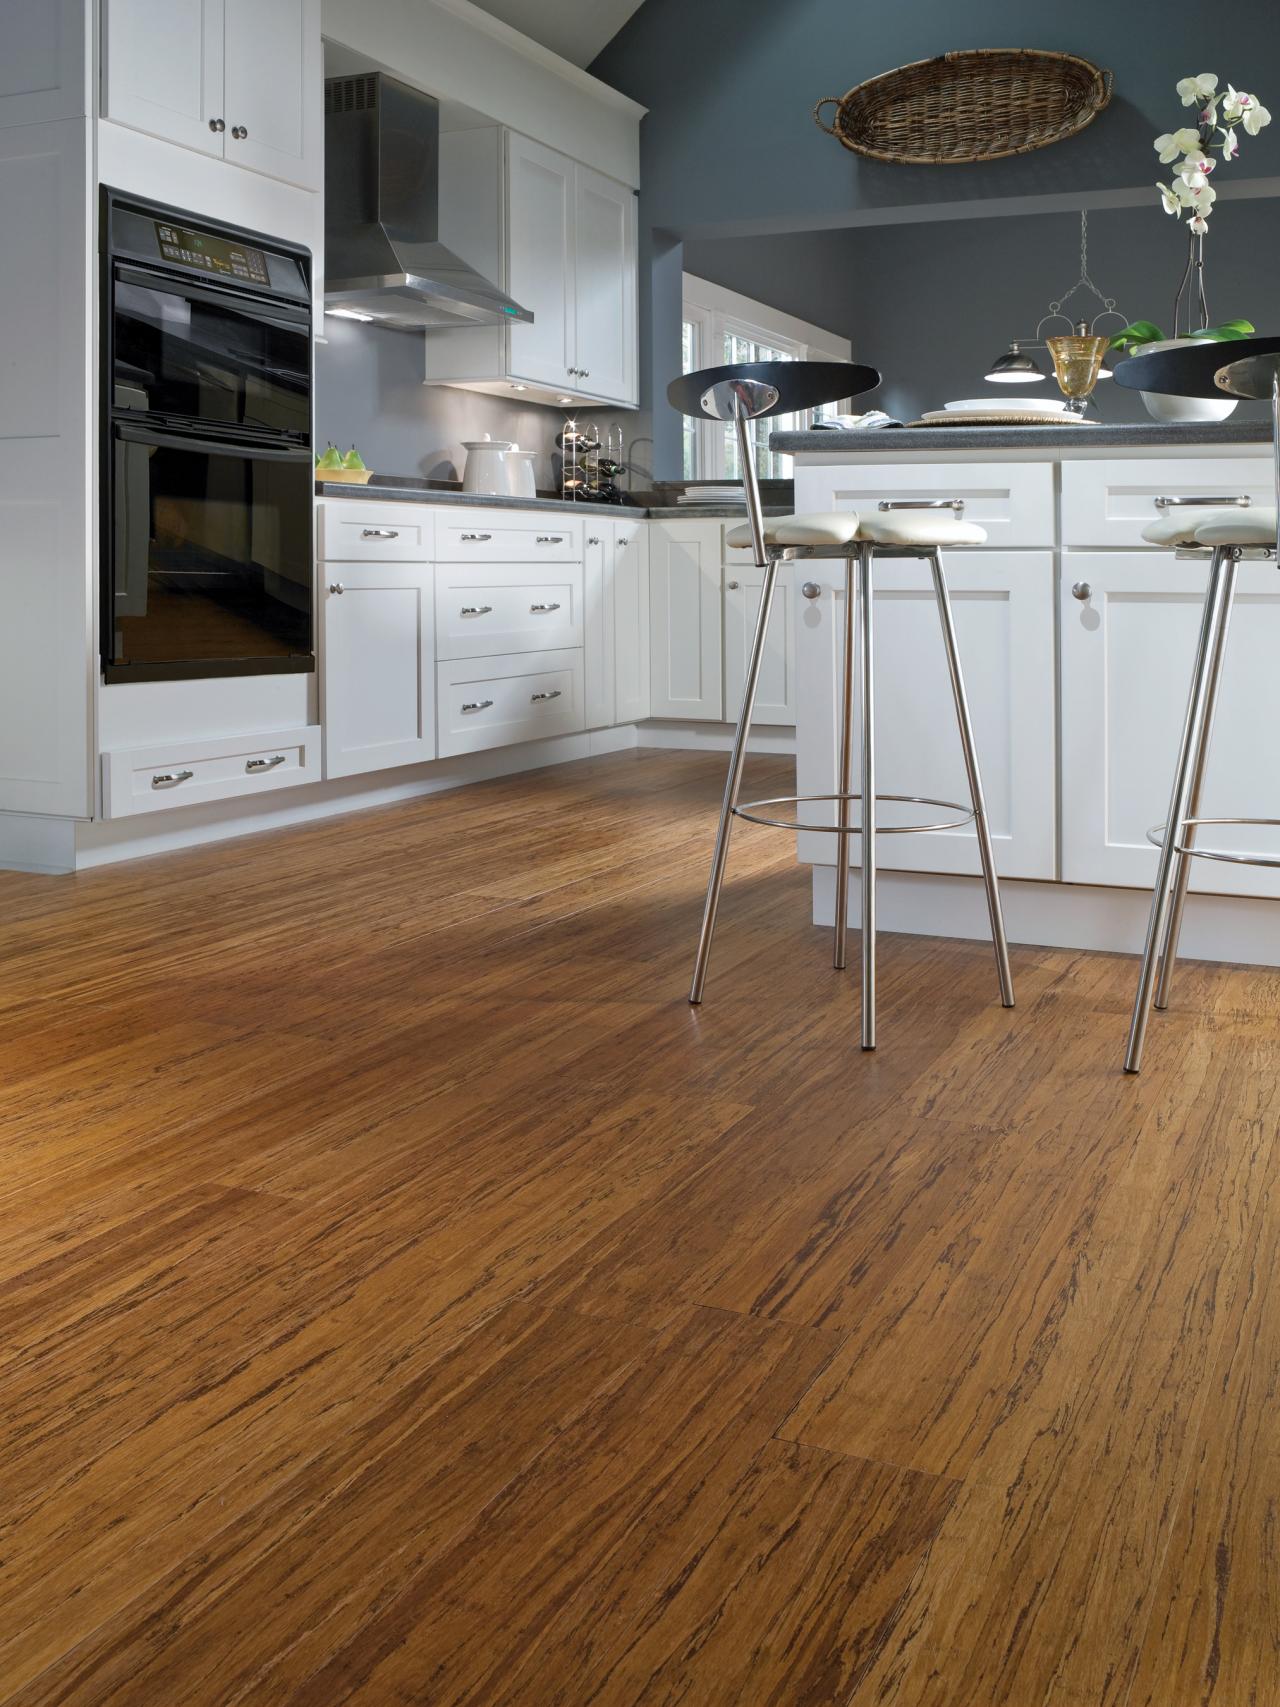 Pros And Cons Of Bamboo Flooring, Is Bamboo Flooring More Durable Than Hardwood